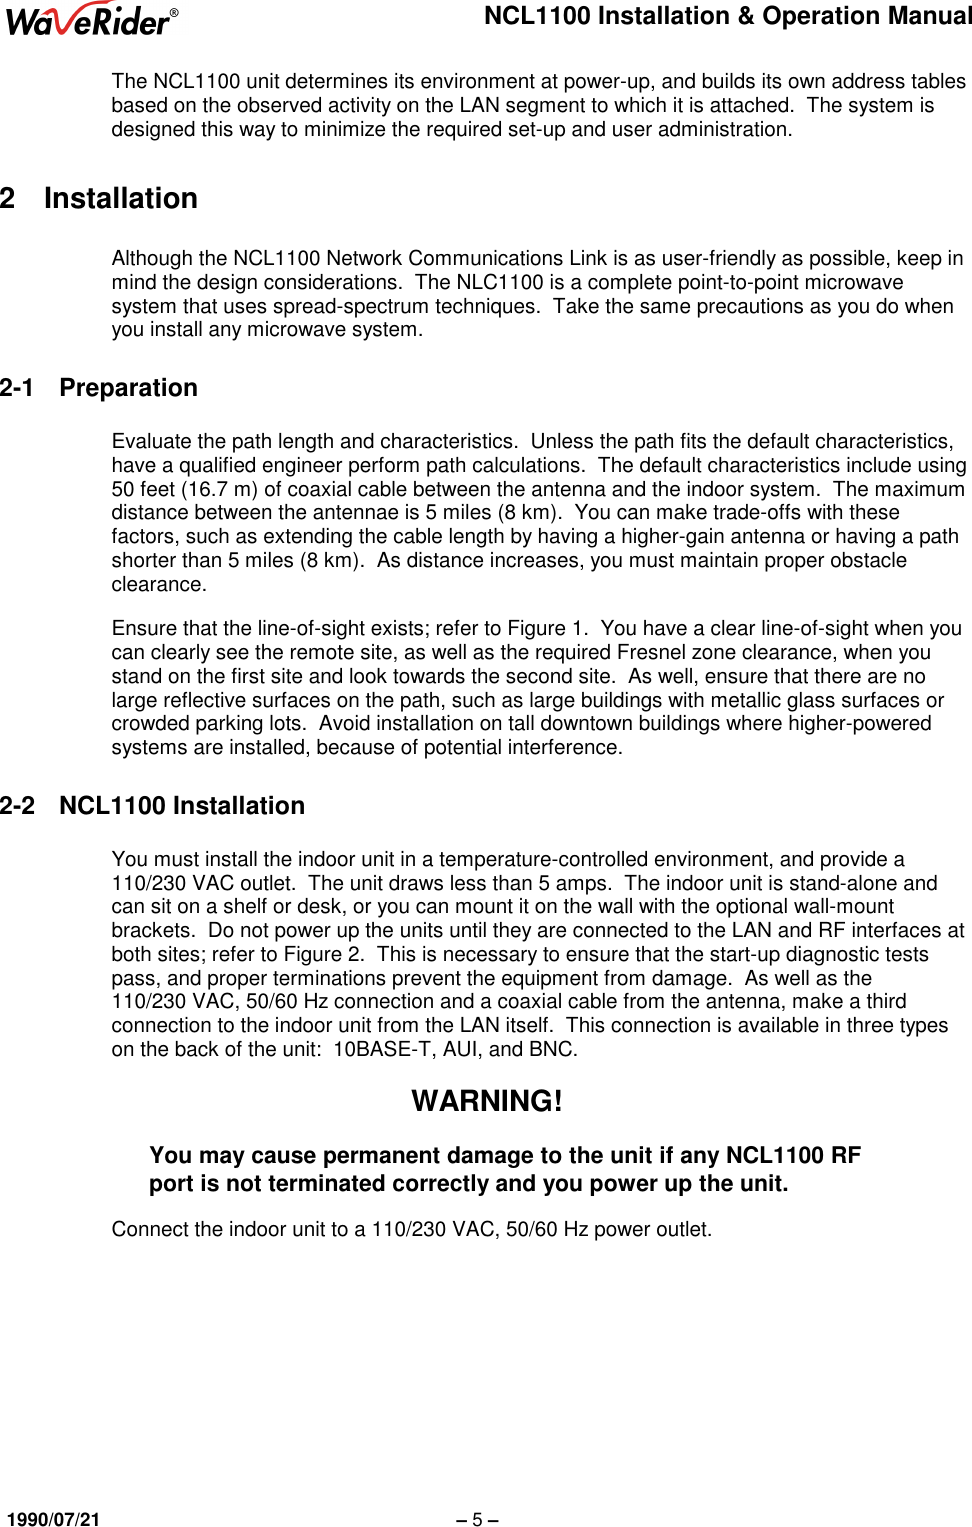 NCL1100 Installation &amp; Operation Manual1990/07/21 – 5 –The NCL1100 unit determines its environment at power-up, and builds its own address tablesbased on the observed activity on the LAN segment to which it is attached.  The system isdesigned this way to minimize the required set-up and user administration.2 InstallationAlthough the NCL1100 Network Communications Link is as user-friendly as possible, keep inmind the design considerations.  The NLC1100 is a complete point-to-point microwavesystem that uses spread-spectrum techniques.  Take the same precautions as you do whenyou install any microwave system.2-1 PreparationEvaluate the path length and characteristics.  Unless the path fits the default characteristics,have a qualified engineer perform path calculations.  The default characteristics include using50 feet (16.7 m) of coaxial cable between the antenna and the indoor system.  The maximumdistance between the antennae is 5 miles (8 km).  You can make trade-offs with thesefactors, such as extending the cable length by having a higher-gain antenna or having a pathshorter than 5 miles (8 km).  As distance increases, you must maintain proper obstacleclearance.Ensure that the line-of-sight exists; refer to Figure 1.  You have a clear line-of-sight when youcan clearly see the remote site, as well as the required Fresnel zone clearance, when youstand on the first site and look towards the second site.  As well, ensure that there are nolarge reflective surfaces on the path, such as large buildings with metallic glass surfaces orcrowded parking lots.  Avoid installation on tall downtown buildings where higher-poweredsystems are installed, because of potential interference.2-2 NCL1100 InstallationYou must install the indoor unit in a temperature-controlled environment, and provide a110/230 VAC outlet.  The unit draws less than 5 amps.  The indoor unit is stand-alone andcan sit on a shelf or desk, or you can mount it on the wall with the optional wall-mountbrackets.  Do not power up the units until they are connected to the LAN and RF interfaces atboth sites; refer to Figure 2.  This is necessary to ensure that the start-up diagnostic testspass, and proper terminations prevent the equipment from damage.  As well as the110/230 VAC, 50/60 Hz connection and a coaxial cable from the antenna, make a thirdconnection to the indoor unit from the LAN itself.  This connection is available in three typeson the back of the unit:  10BASE-T, AUI, and BNC.WARNING!You may cause permanent damage to the unit if any NCL1100 RFport is not terminated correctly and you power up the unit.Connect the indoor unit to a 110/230 VAC, 50/60 Hz power outlet.